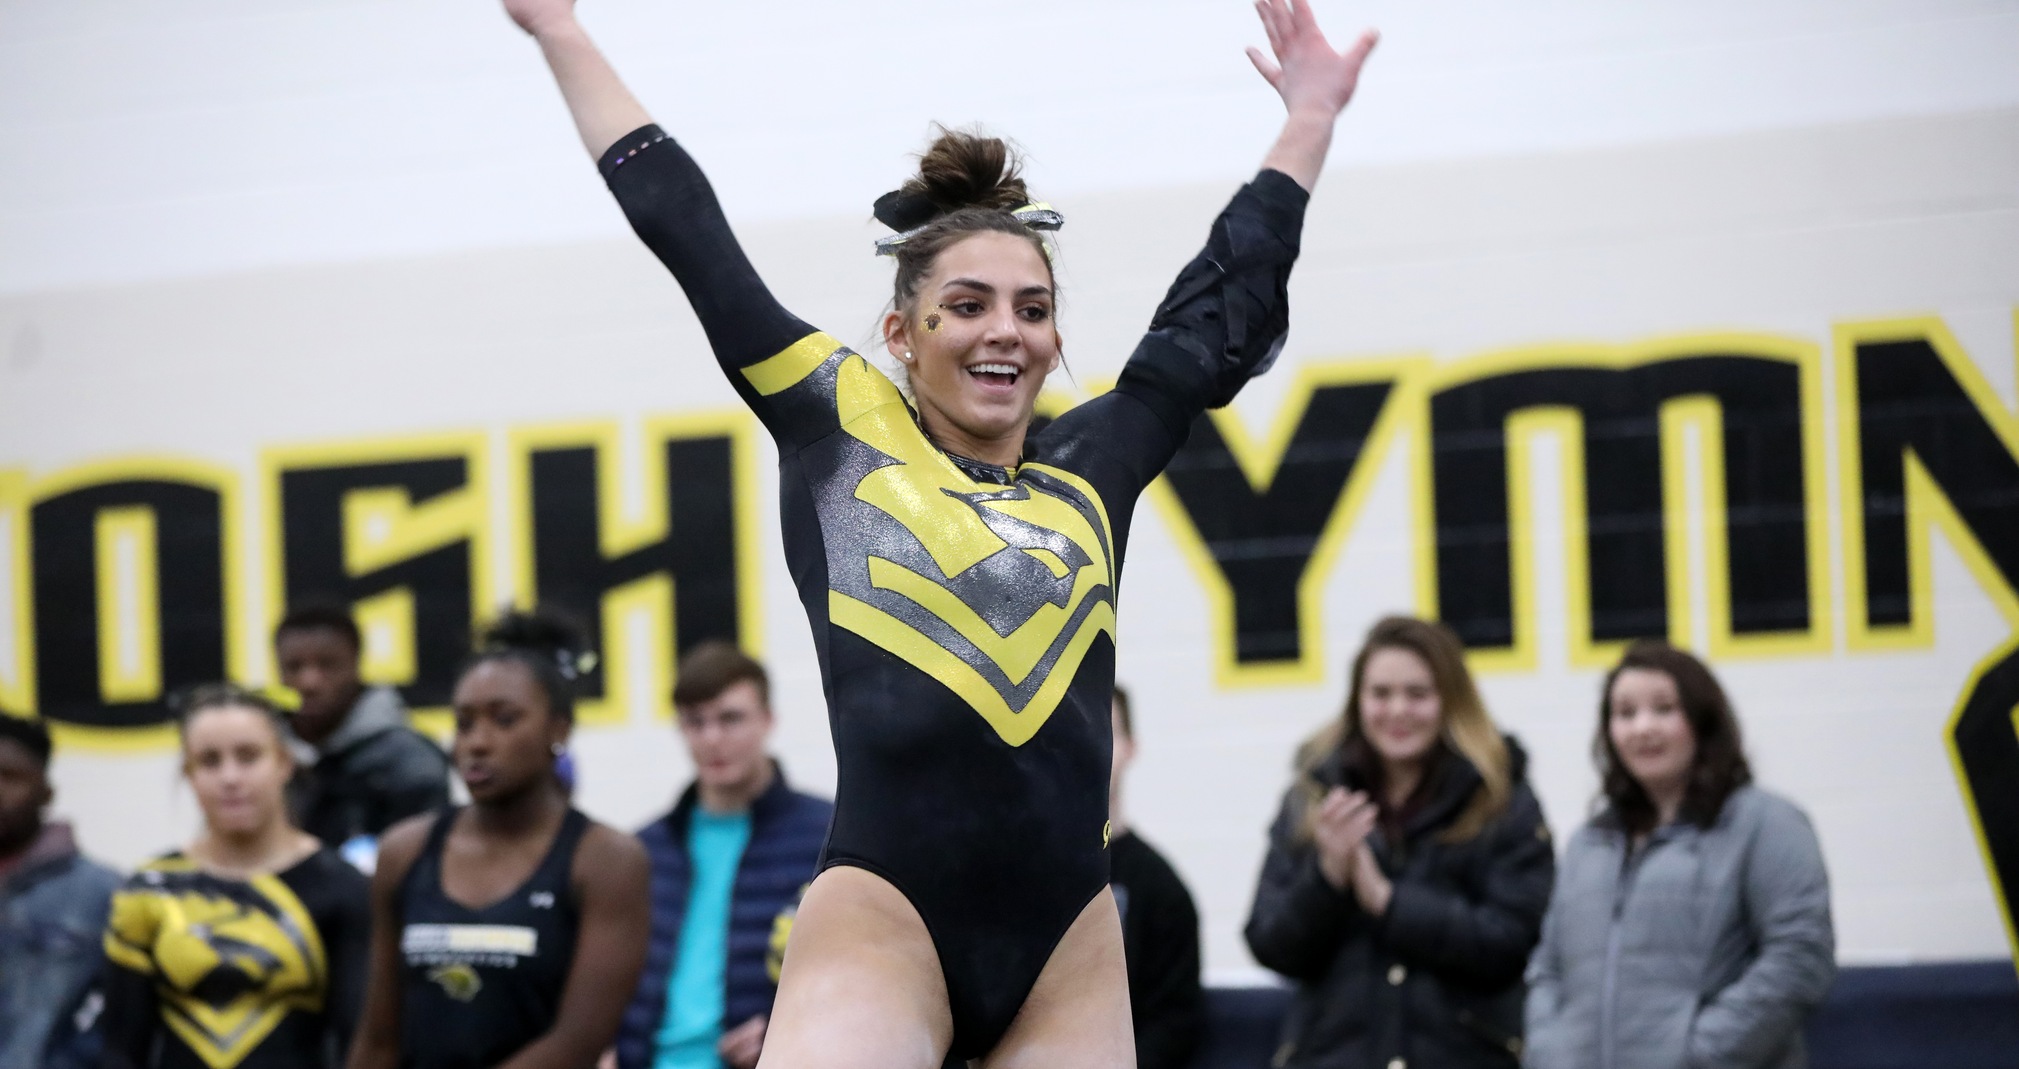 Jessica Bernardo's five top-six finishes included a winning score of 36.575 in the all-around competition.